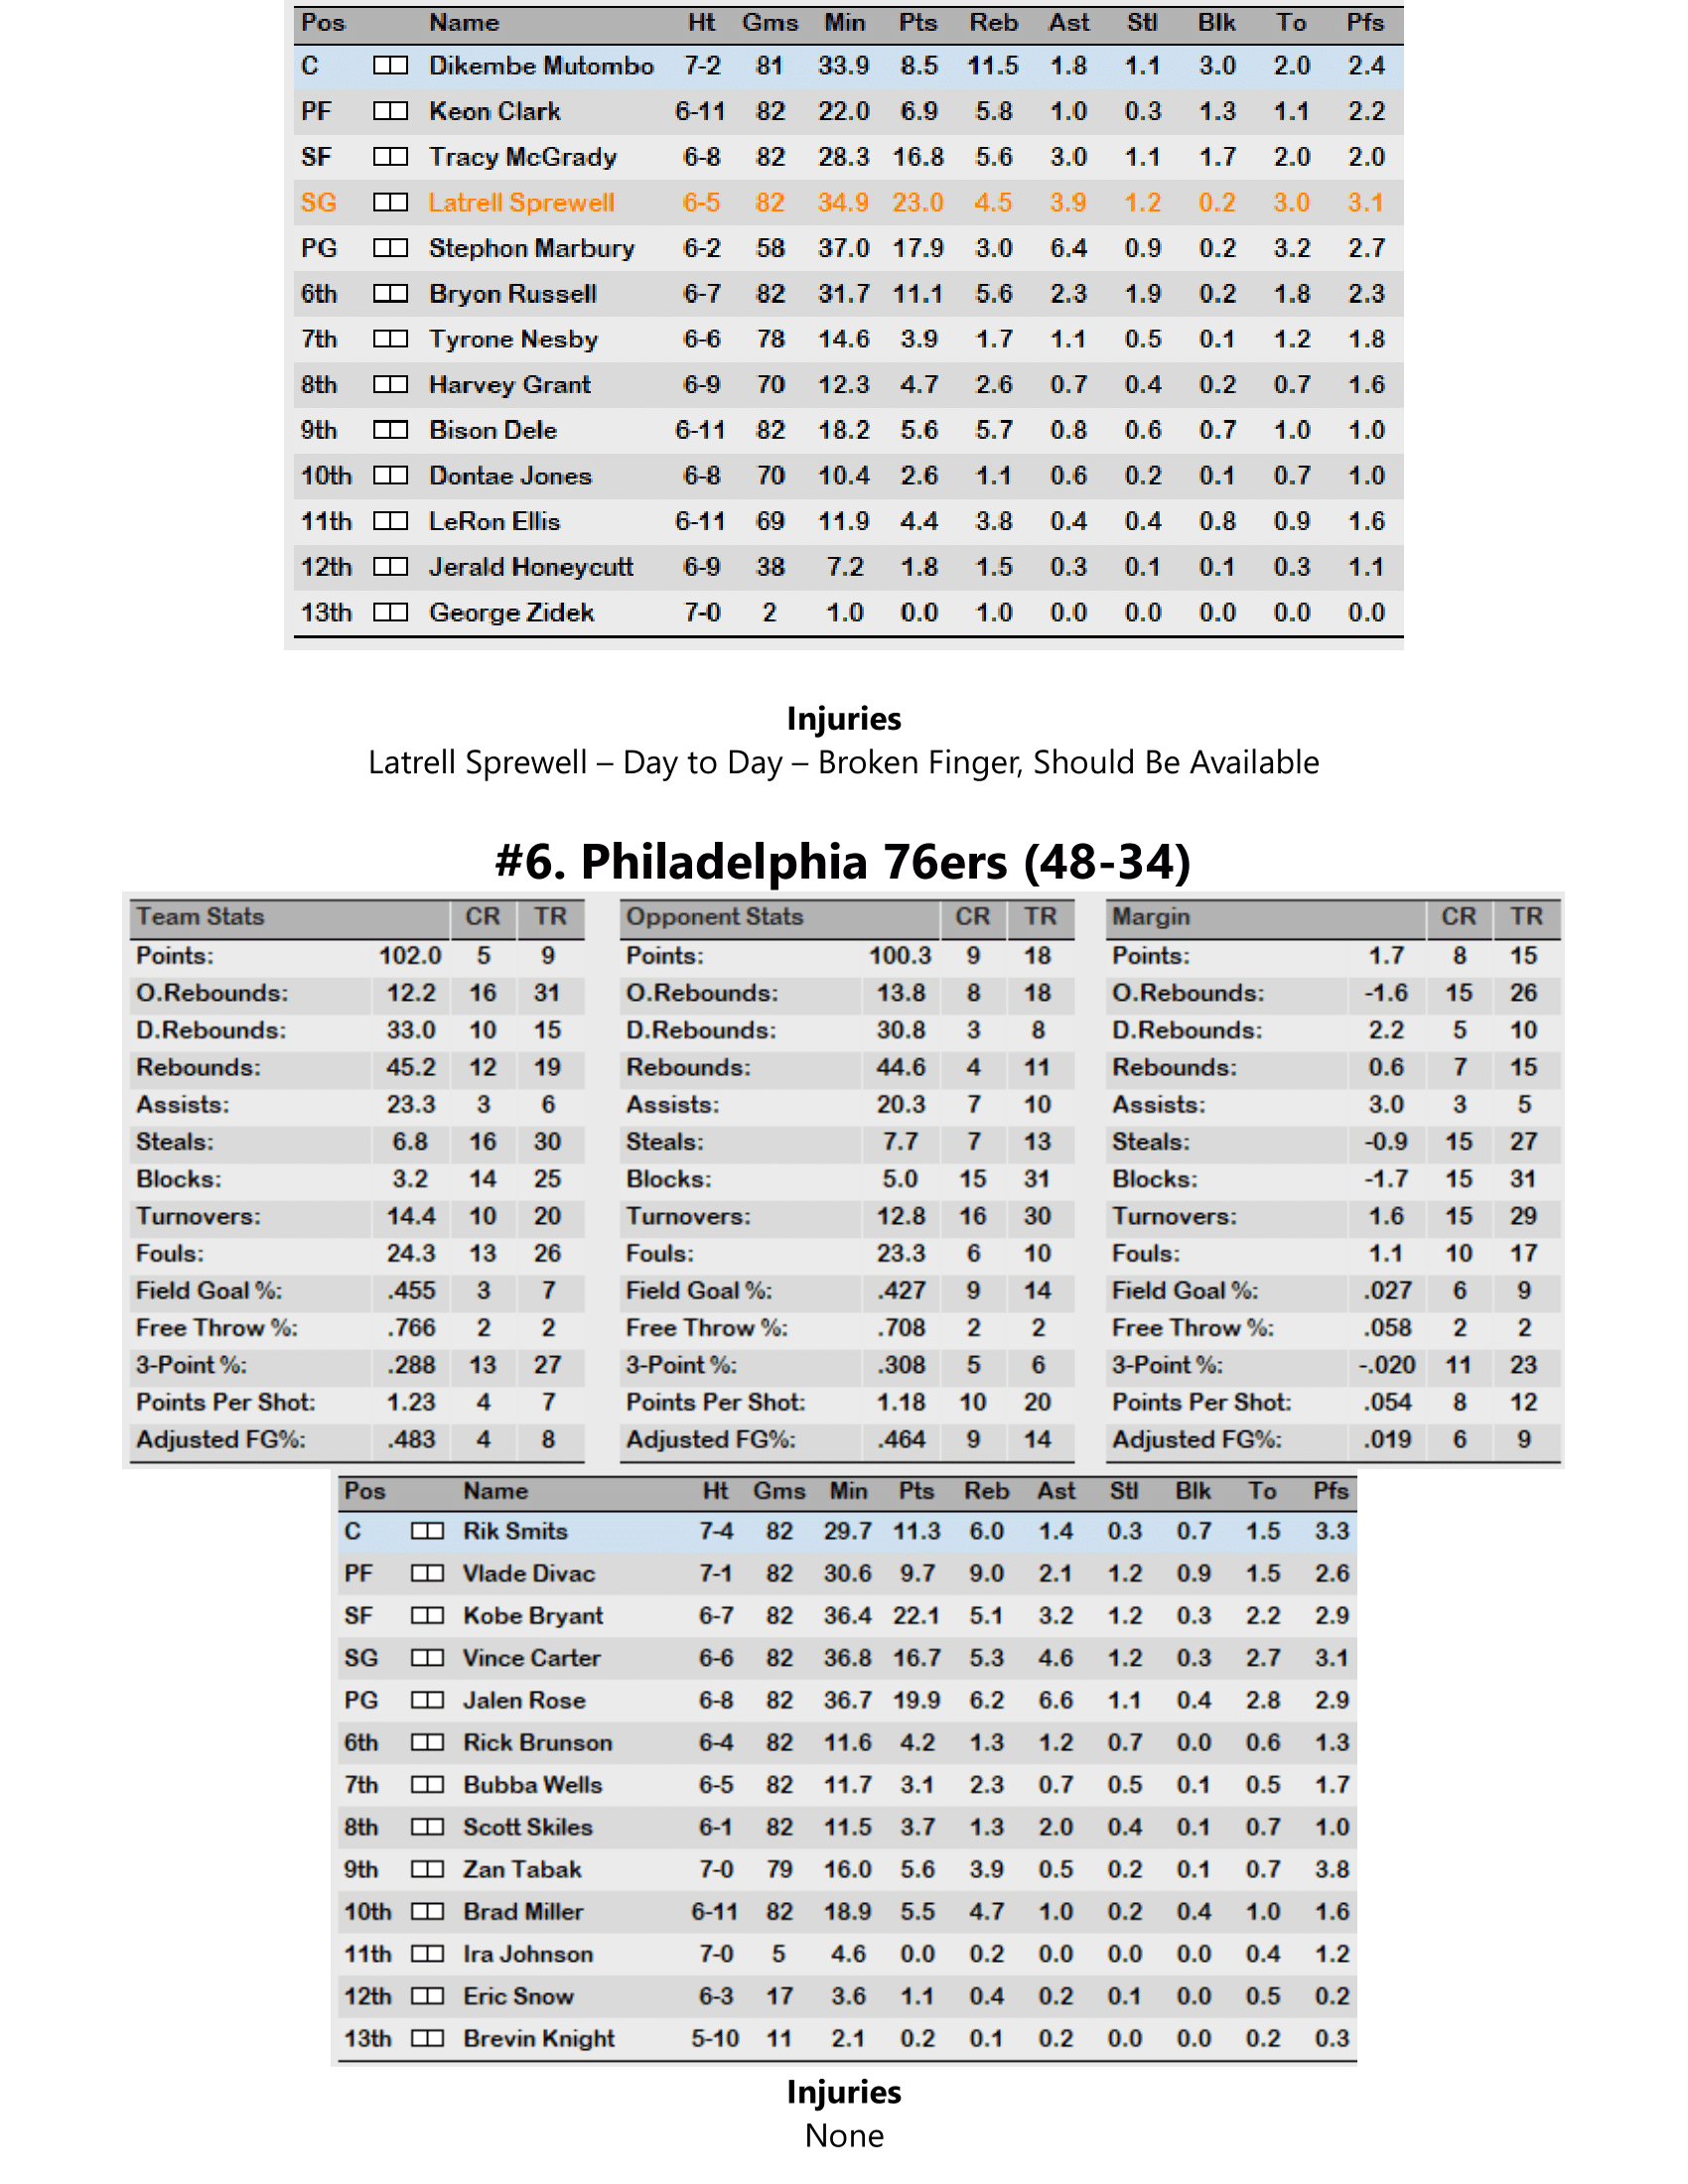 98-99-Part-3-Playoff-Preview-11.png